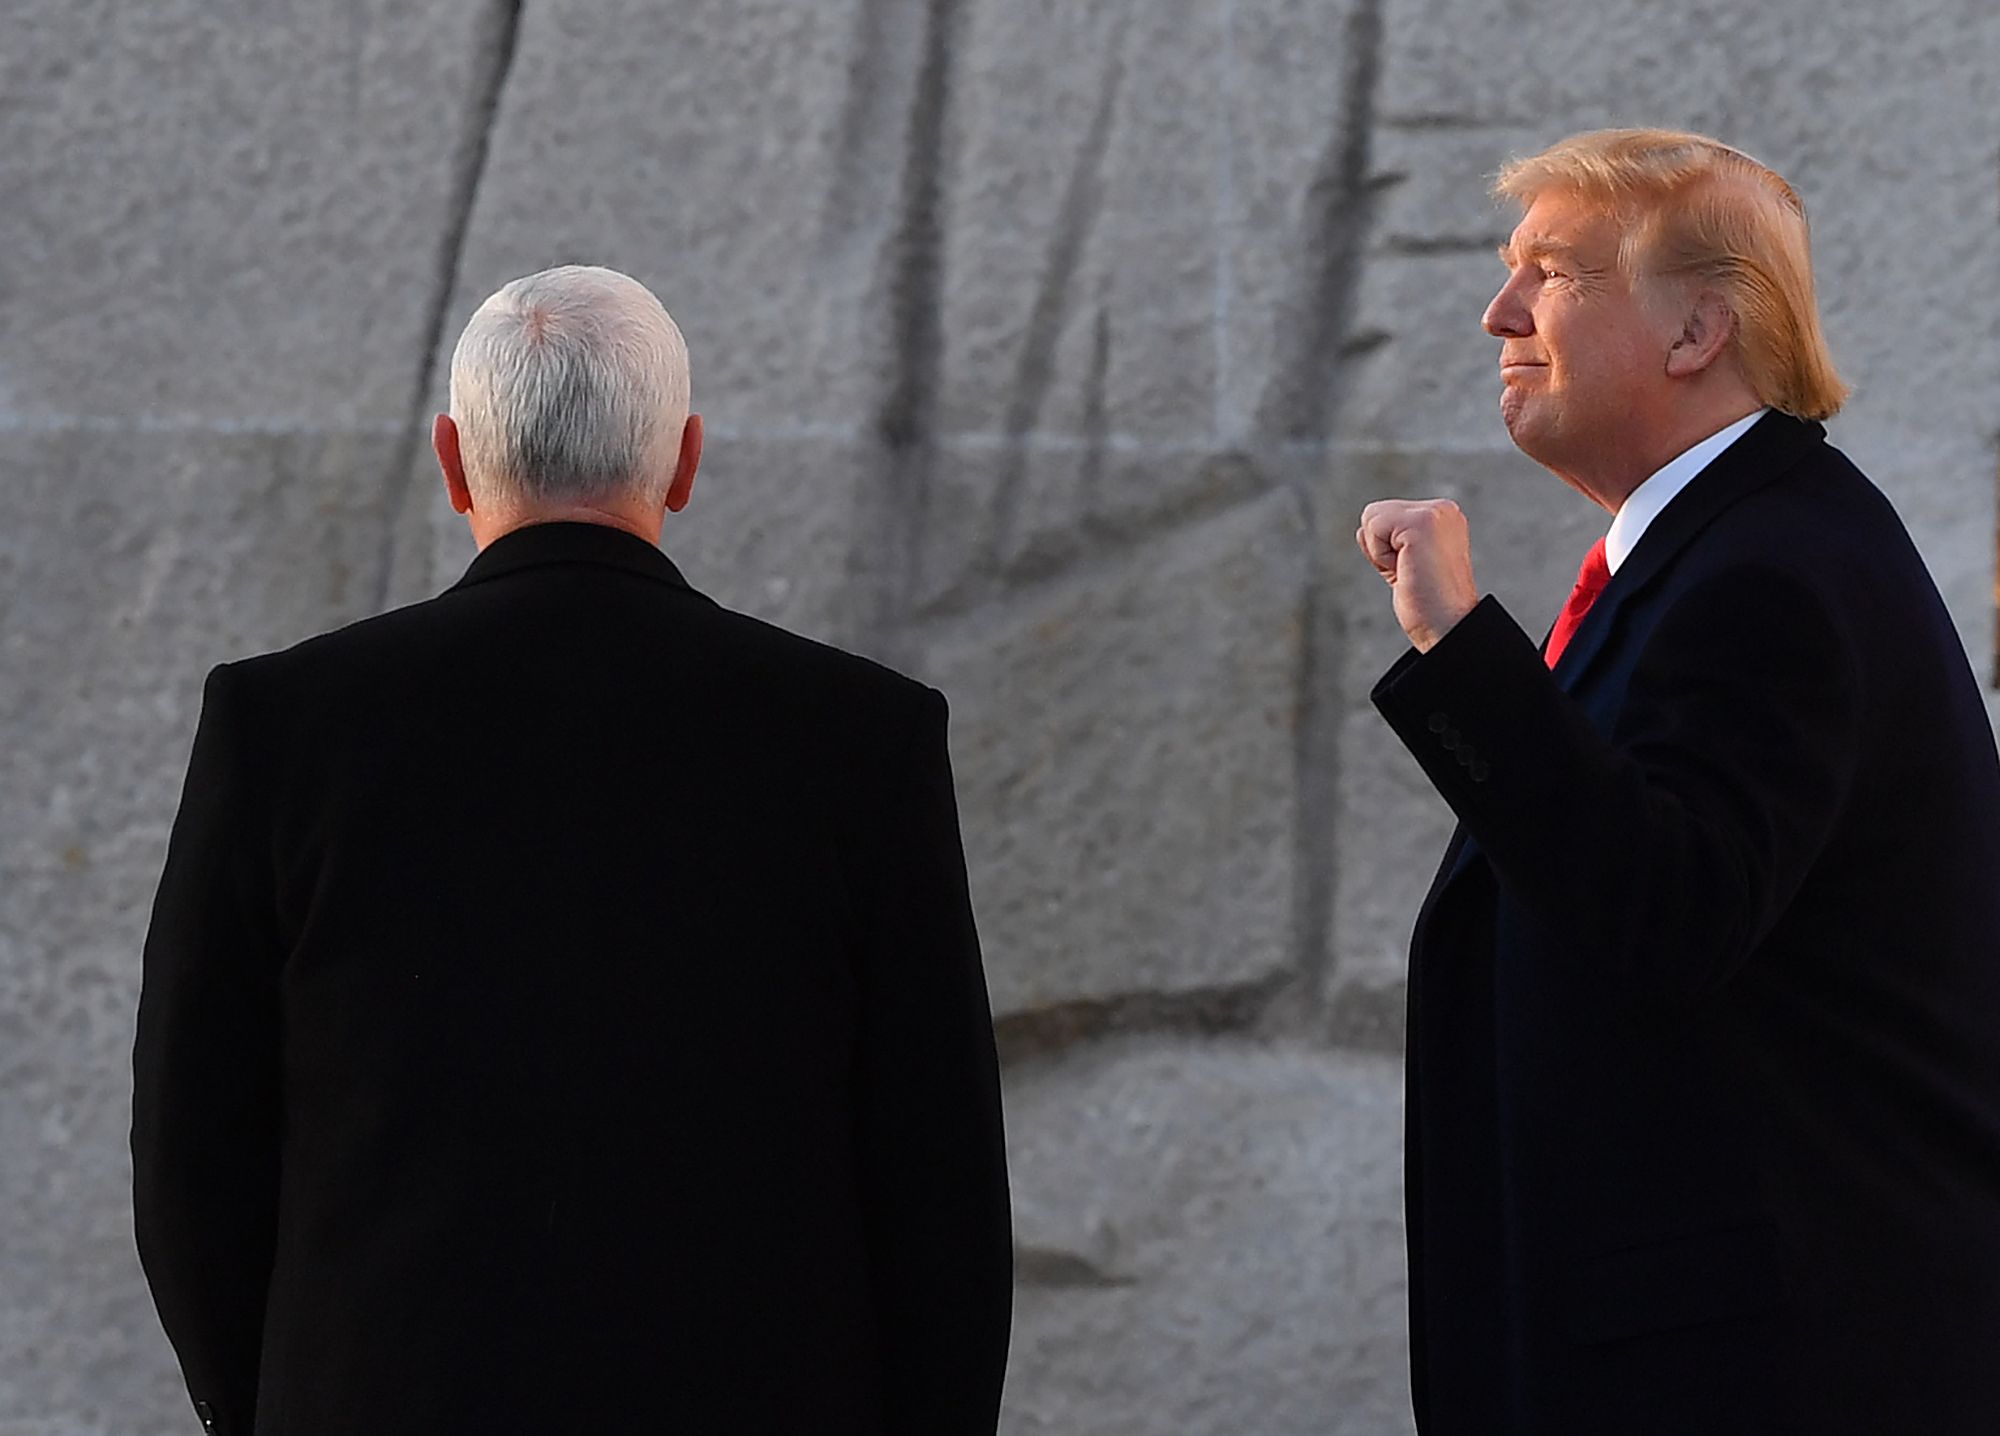 President Donald Trump and US Vice President Mike Pence arrive at the Martin Luther King Jr. memorial on MLK day in Washington, DC